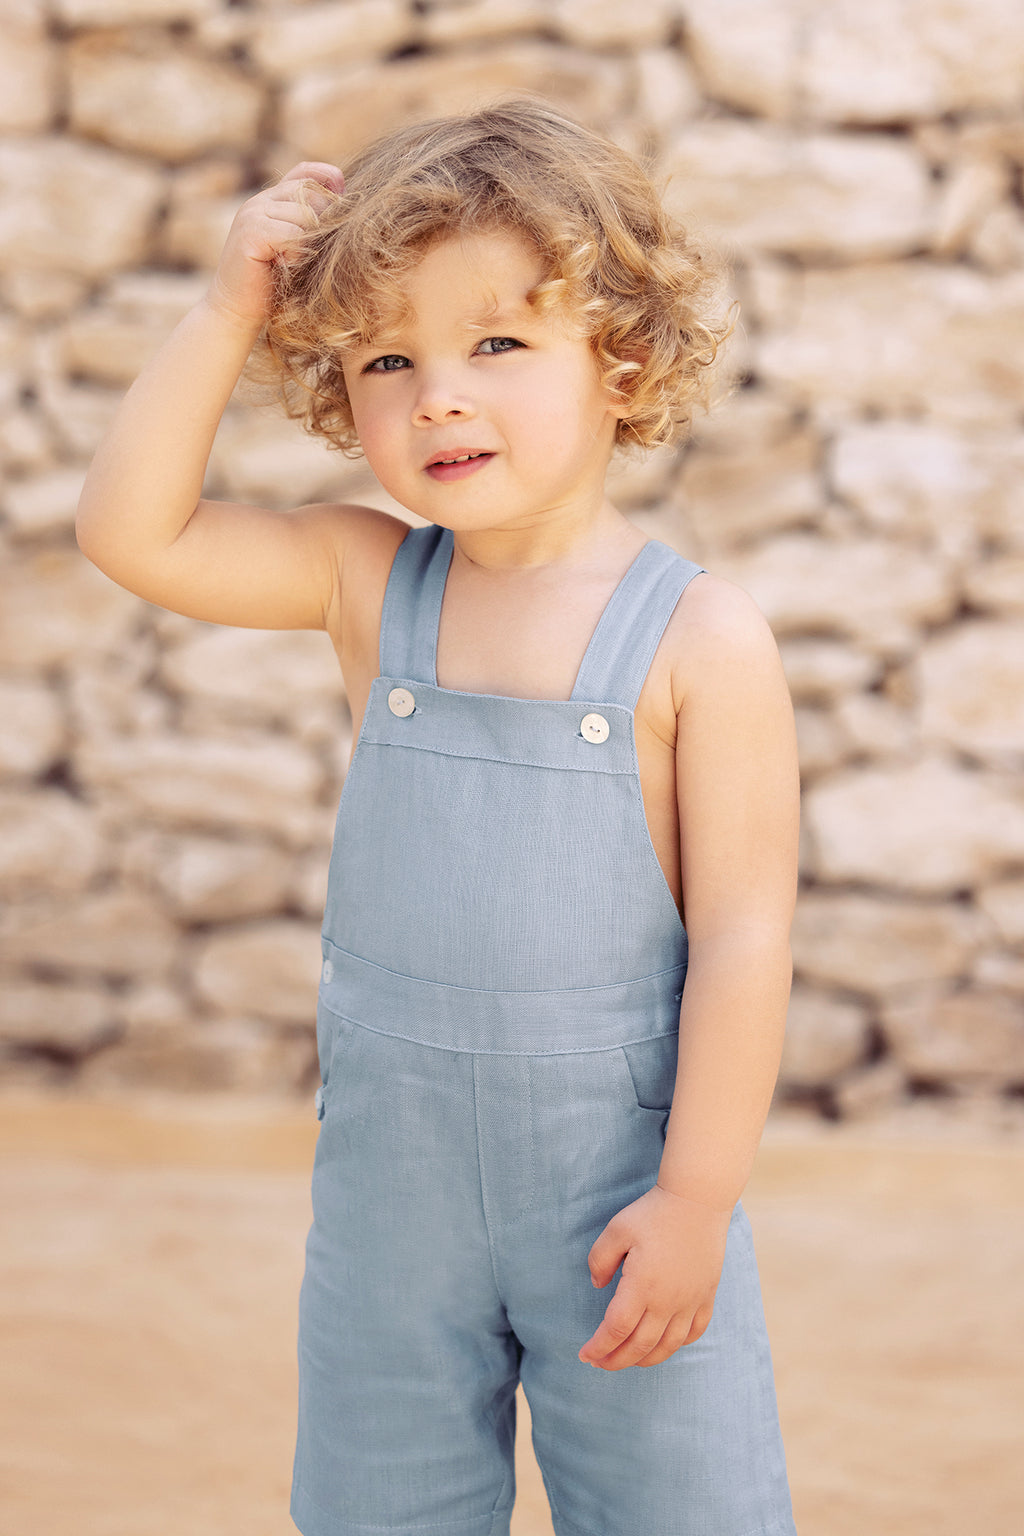 Buy Cotton Dungaree Dress For Newborn Baby Girl | Smiley Buttons